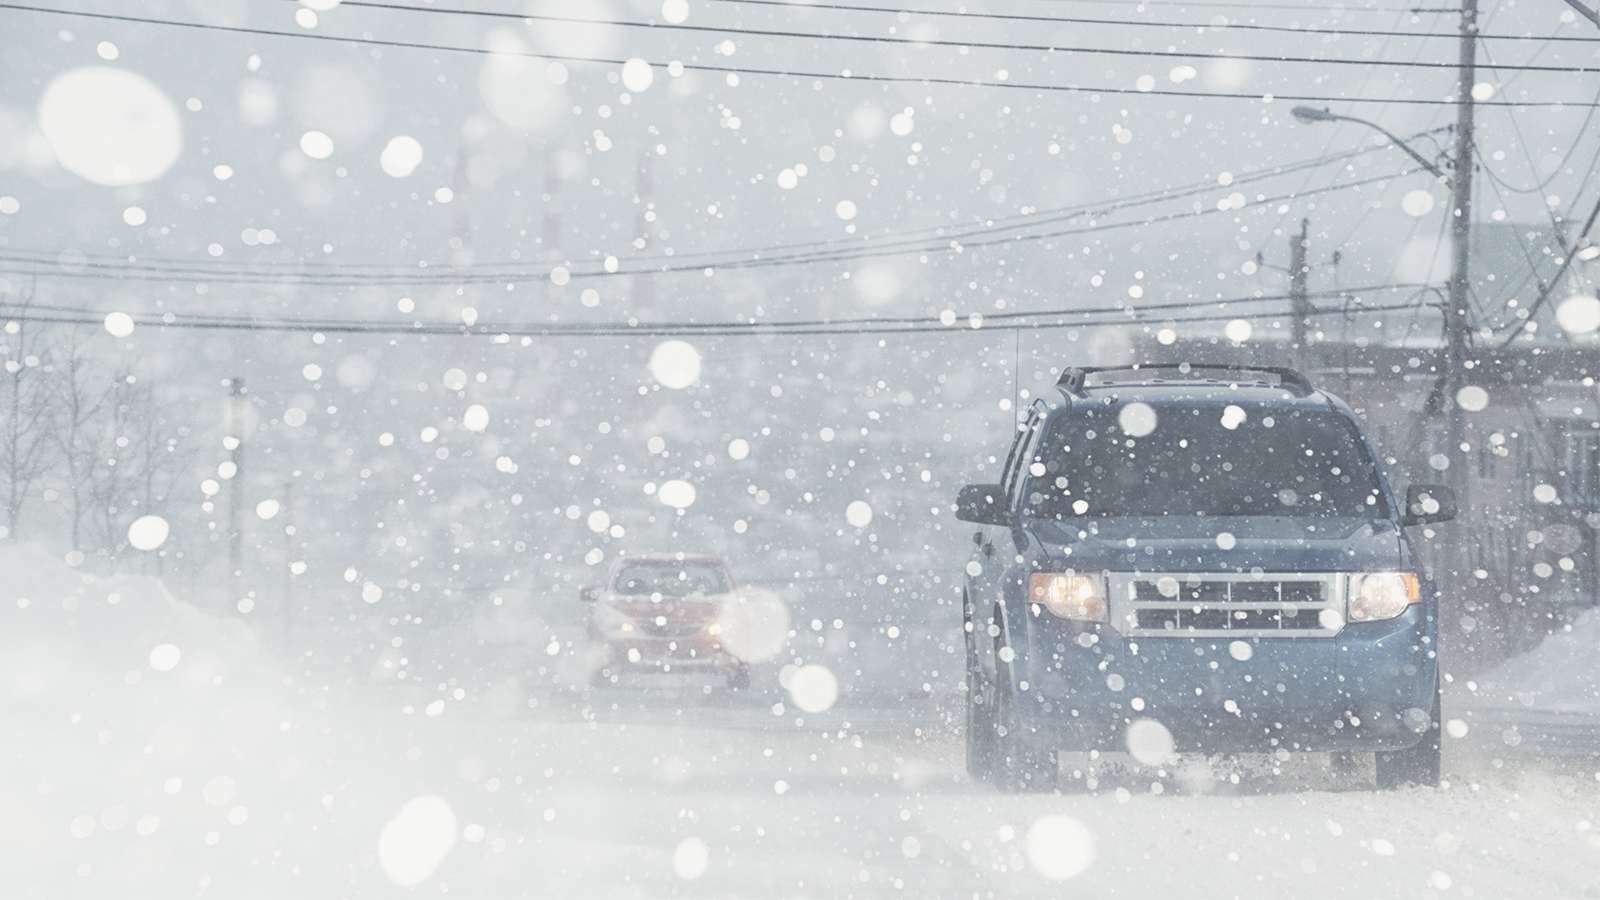 vehicle driving in snowstorm